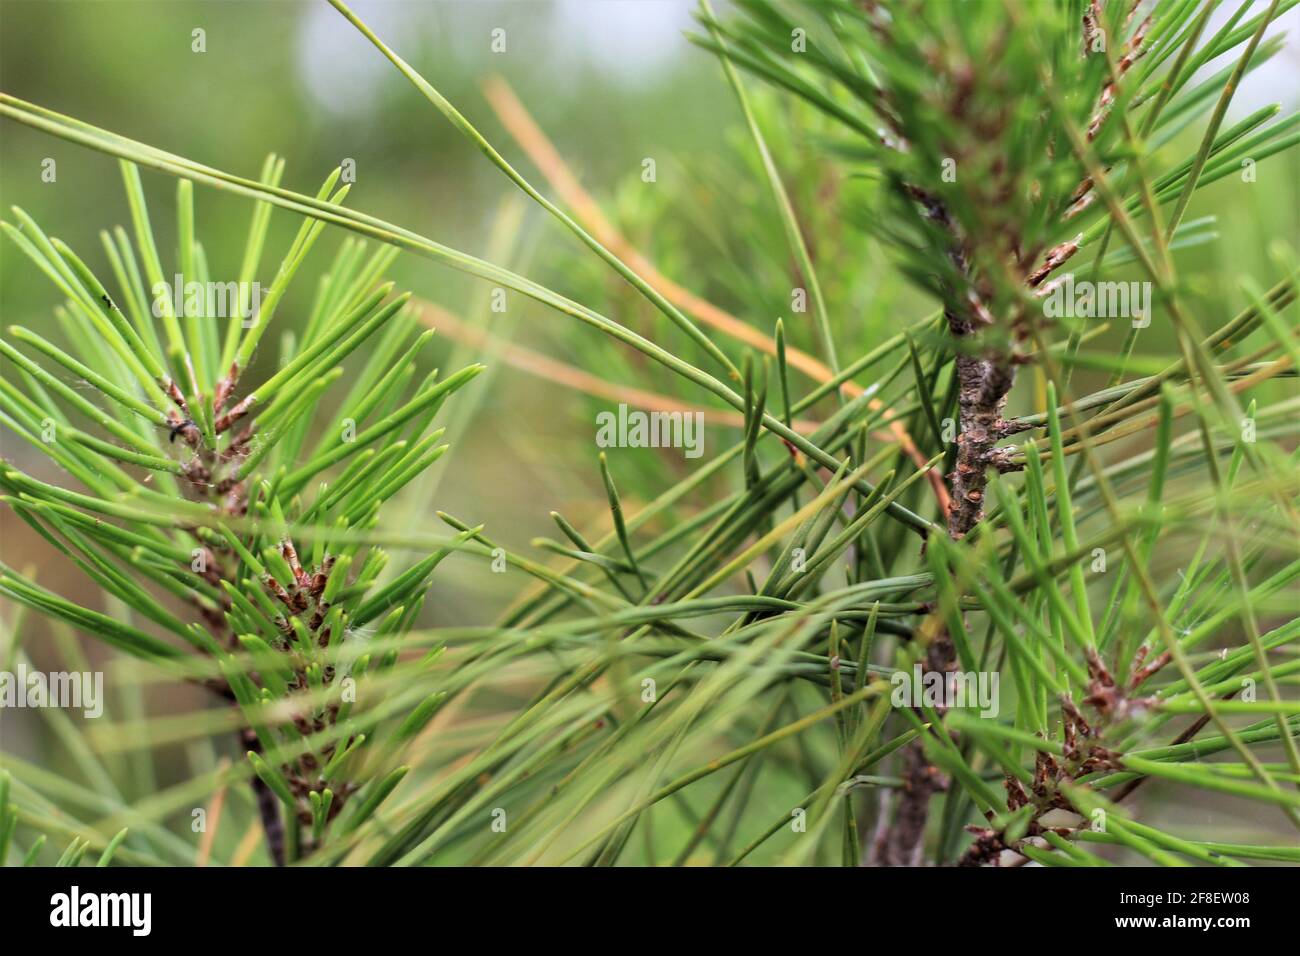 Macro closeup shot of Virginia pine, a species of pines. Also known as scrub pine, jersey pine and poverty pine. Outdoors in nature. Stock Photo